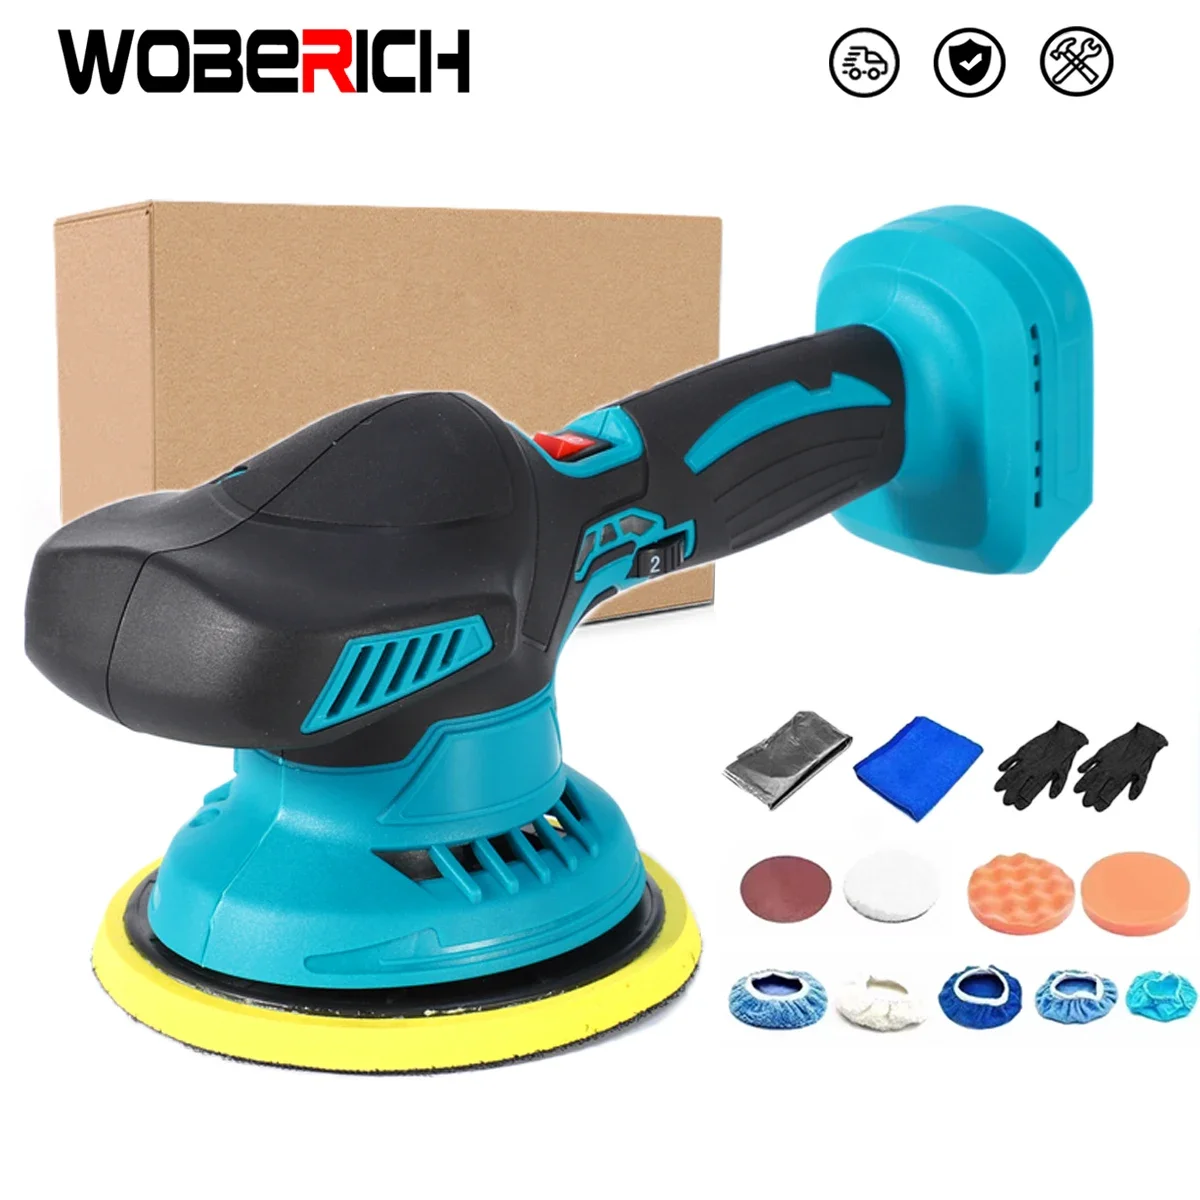 

WOBERICH Electric Car Polisher High Efficient Auto Waxing Polishing Machine Multifunctional Rotary Tool For Makita 18V